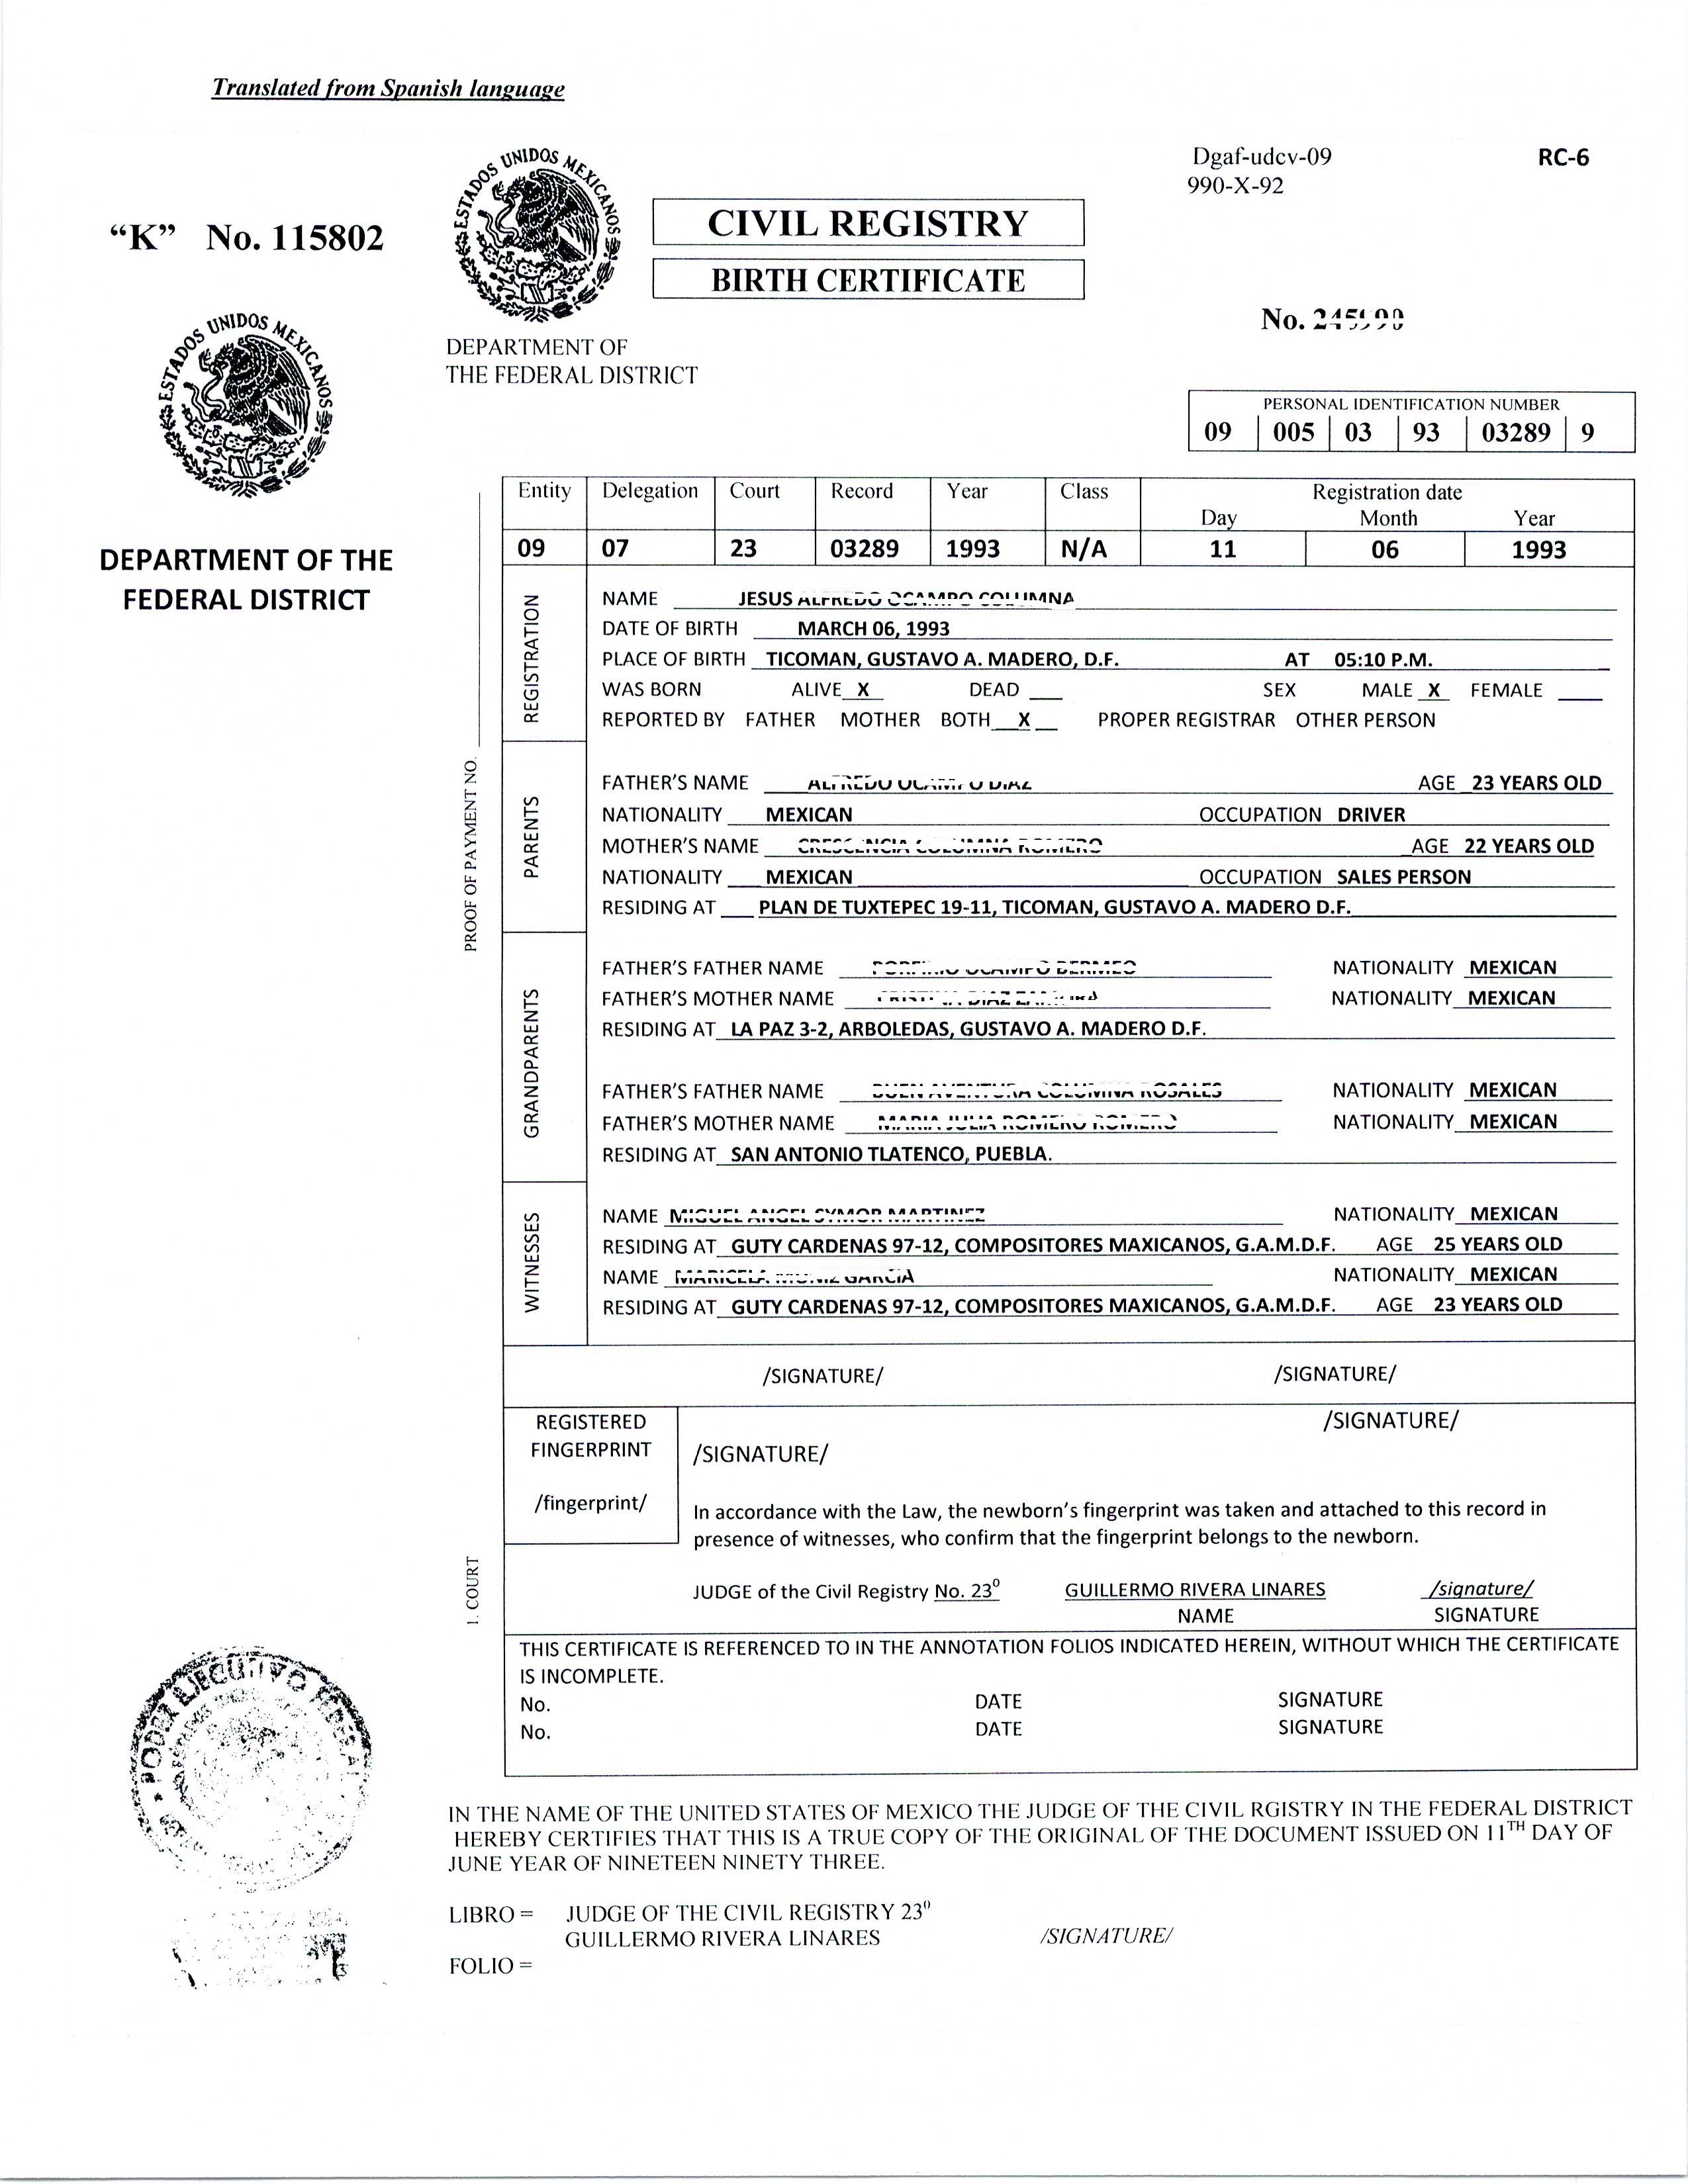 Marriage Certificate Translation Template Ukran Agdiffusion Com Free Birth From English To